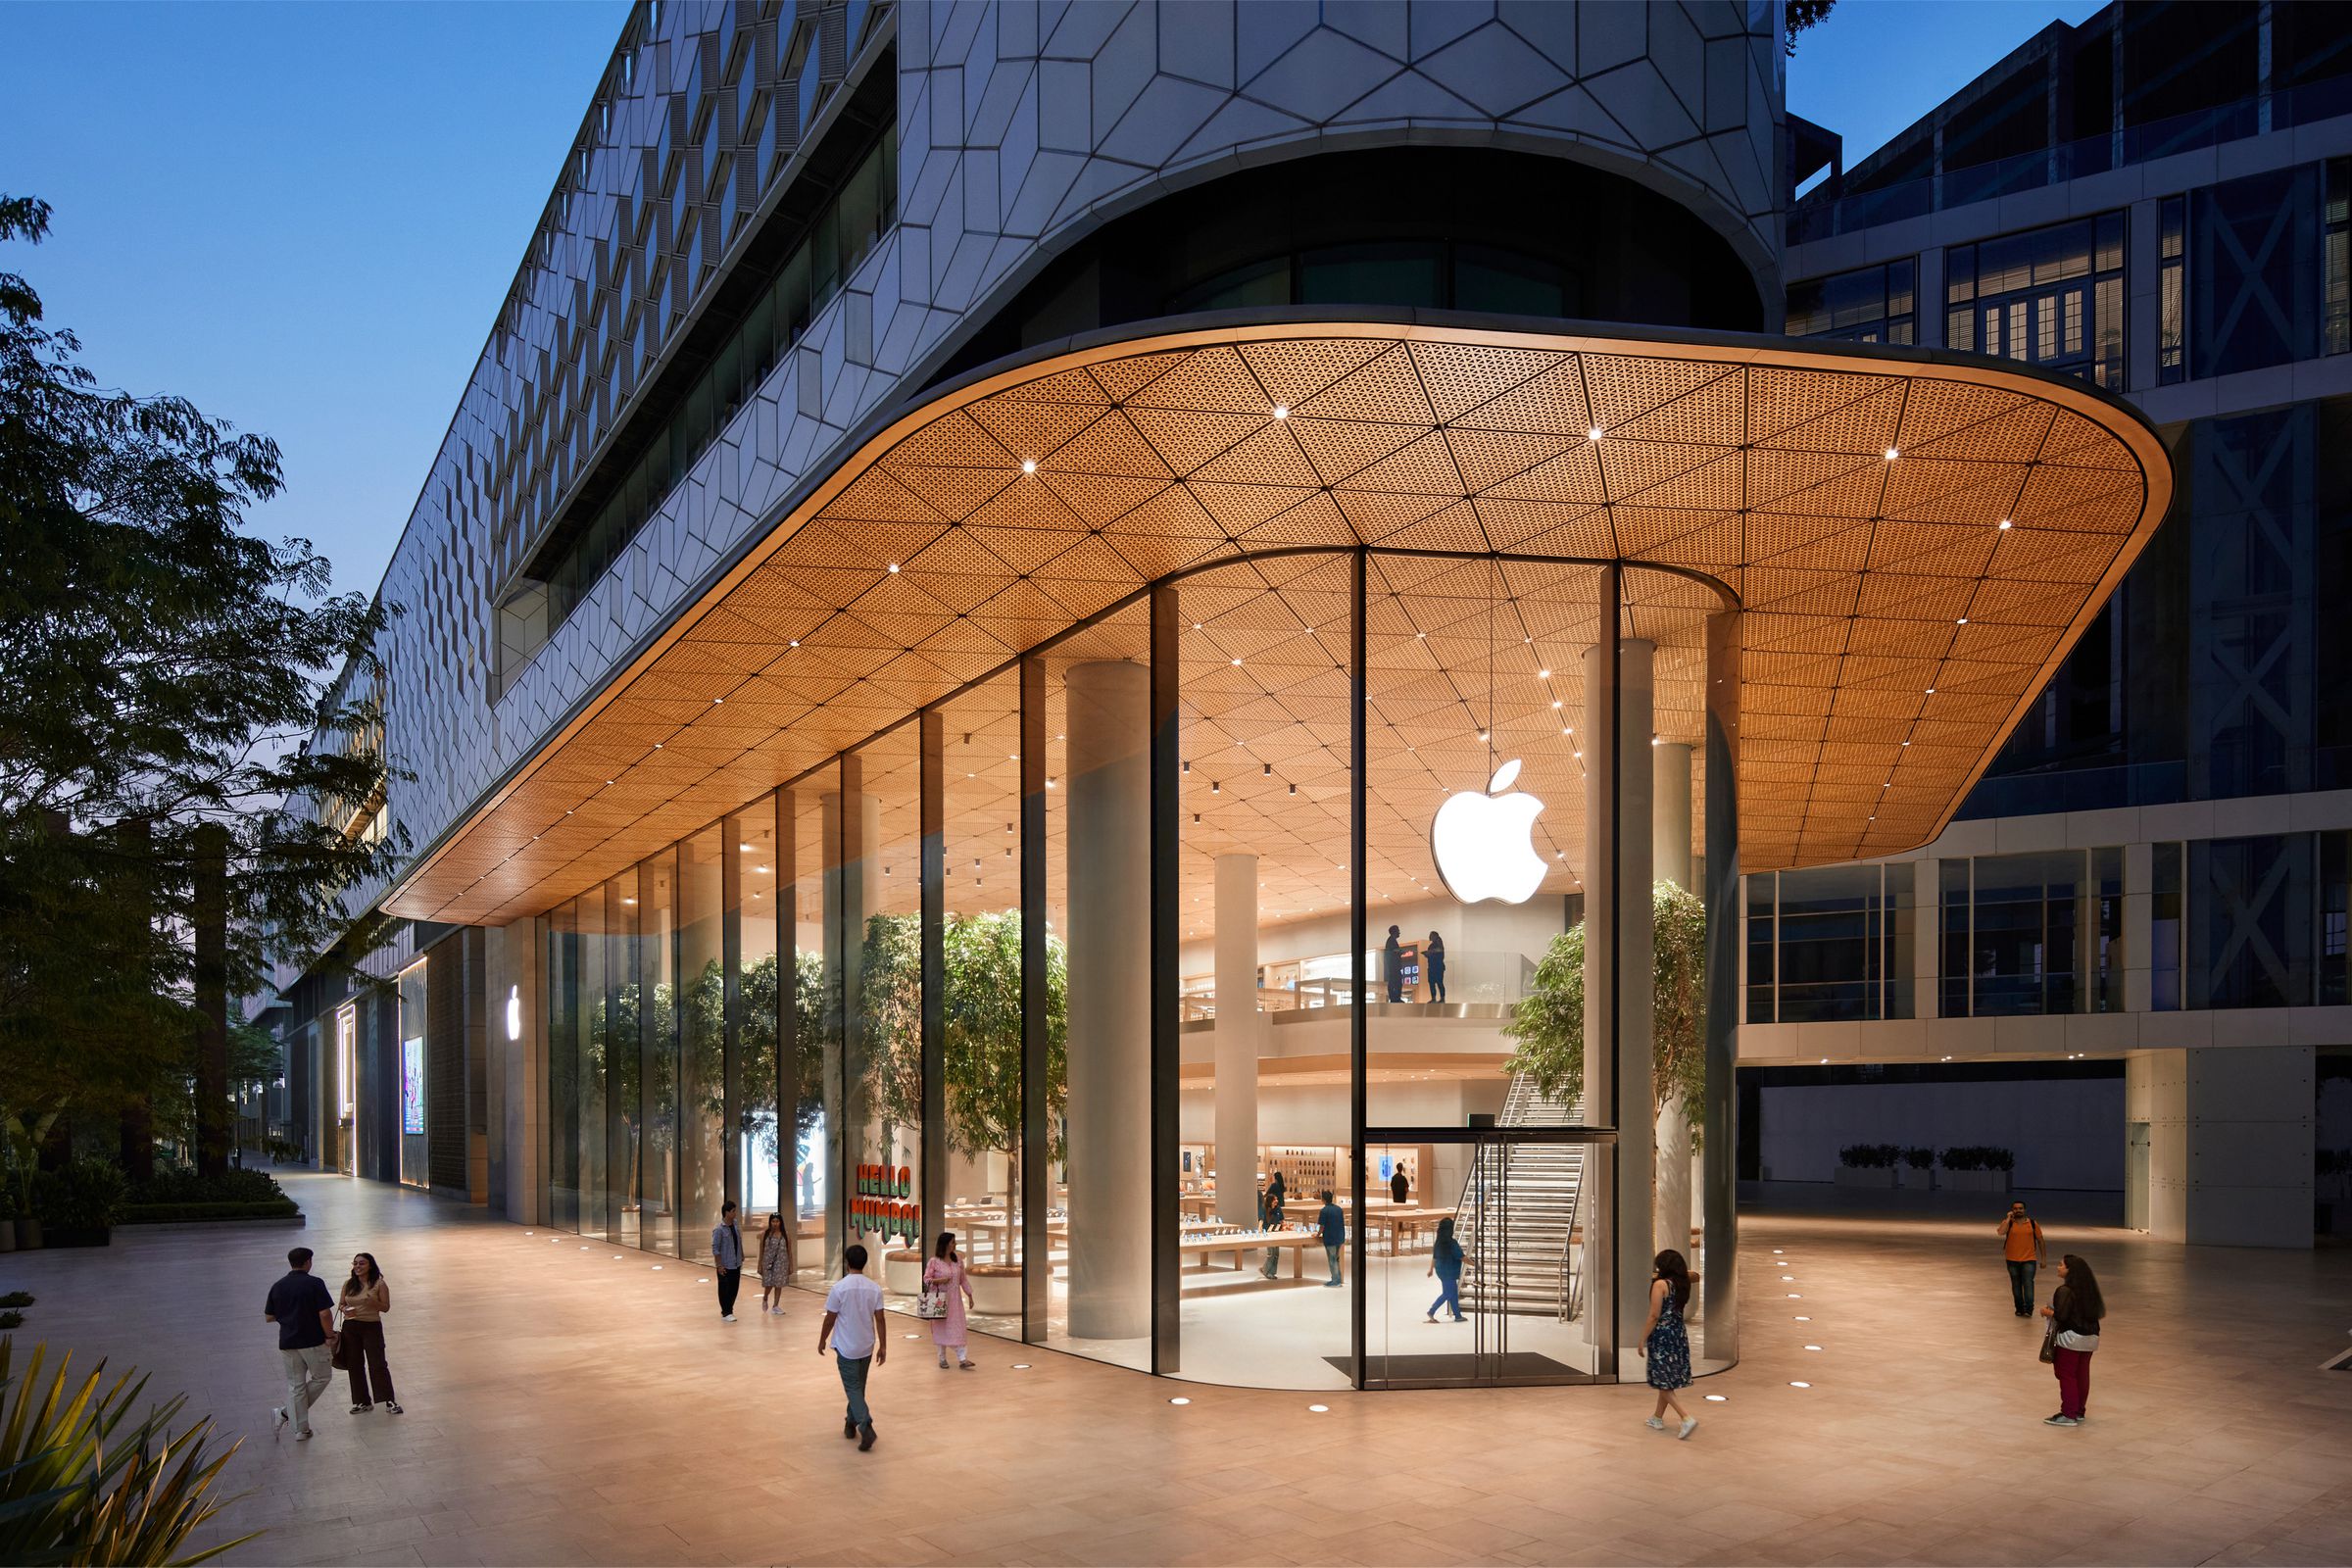 An image showing the outside of the Apple Store in Mumbai, India